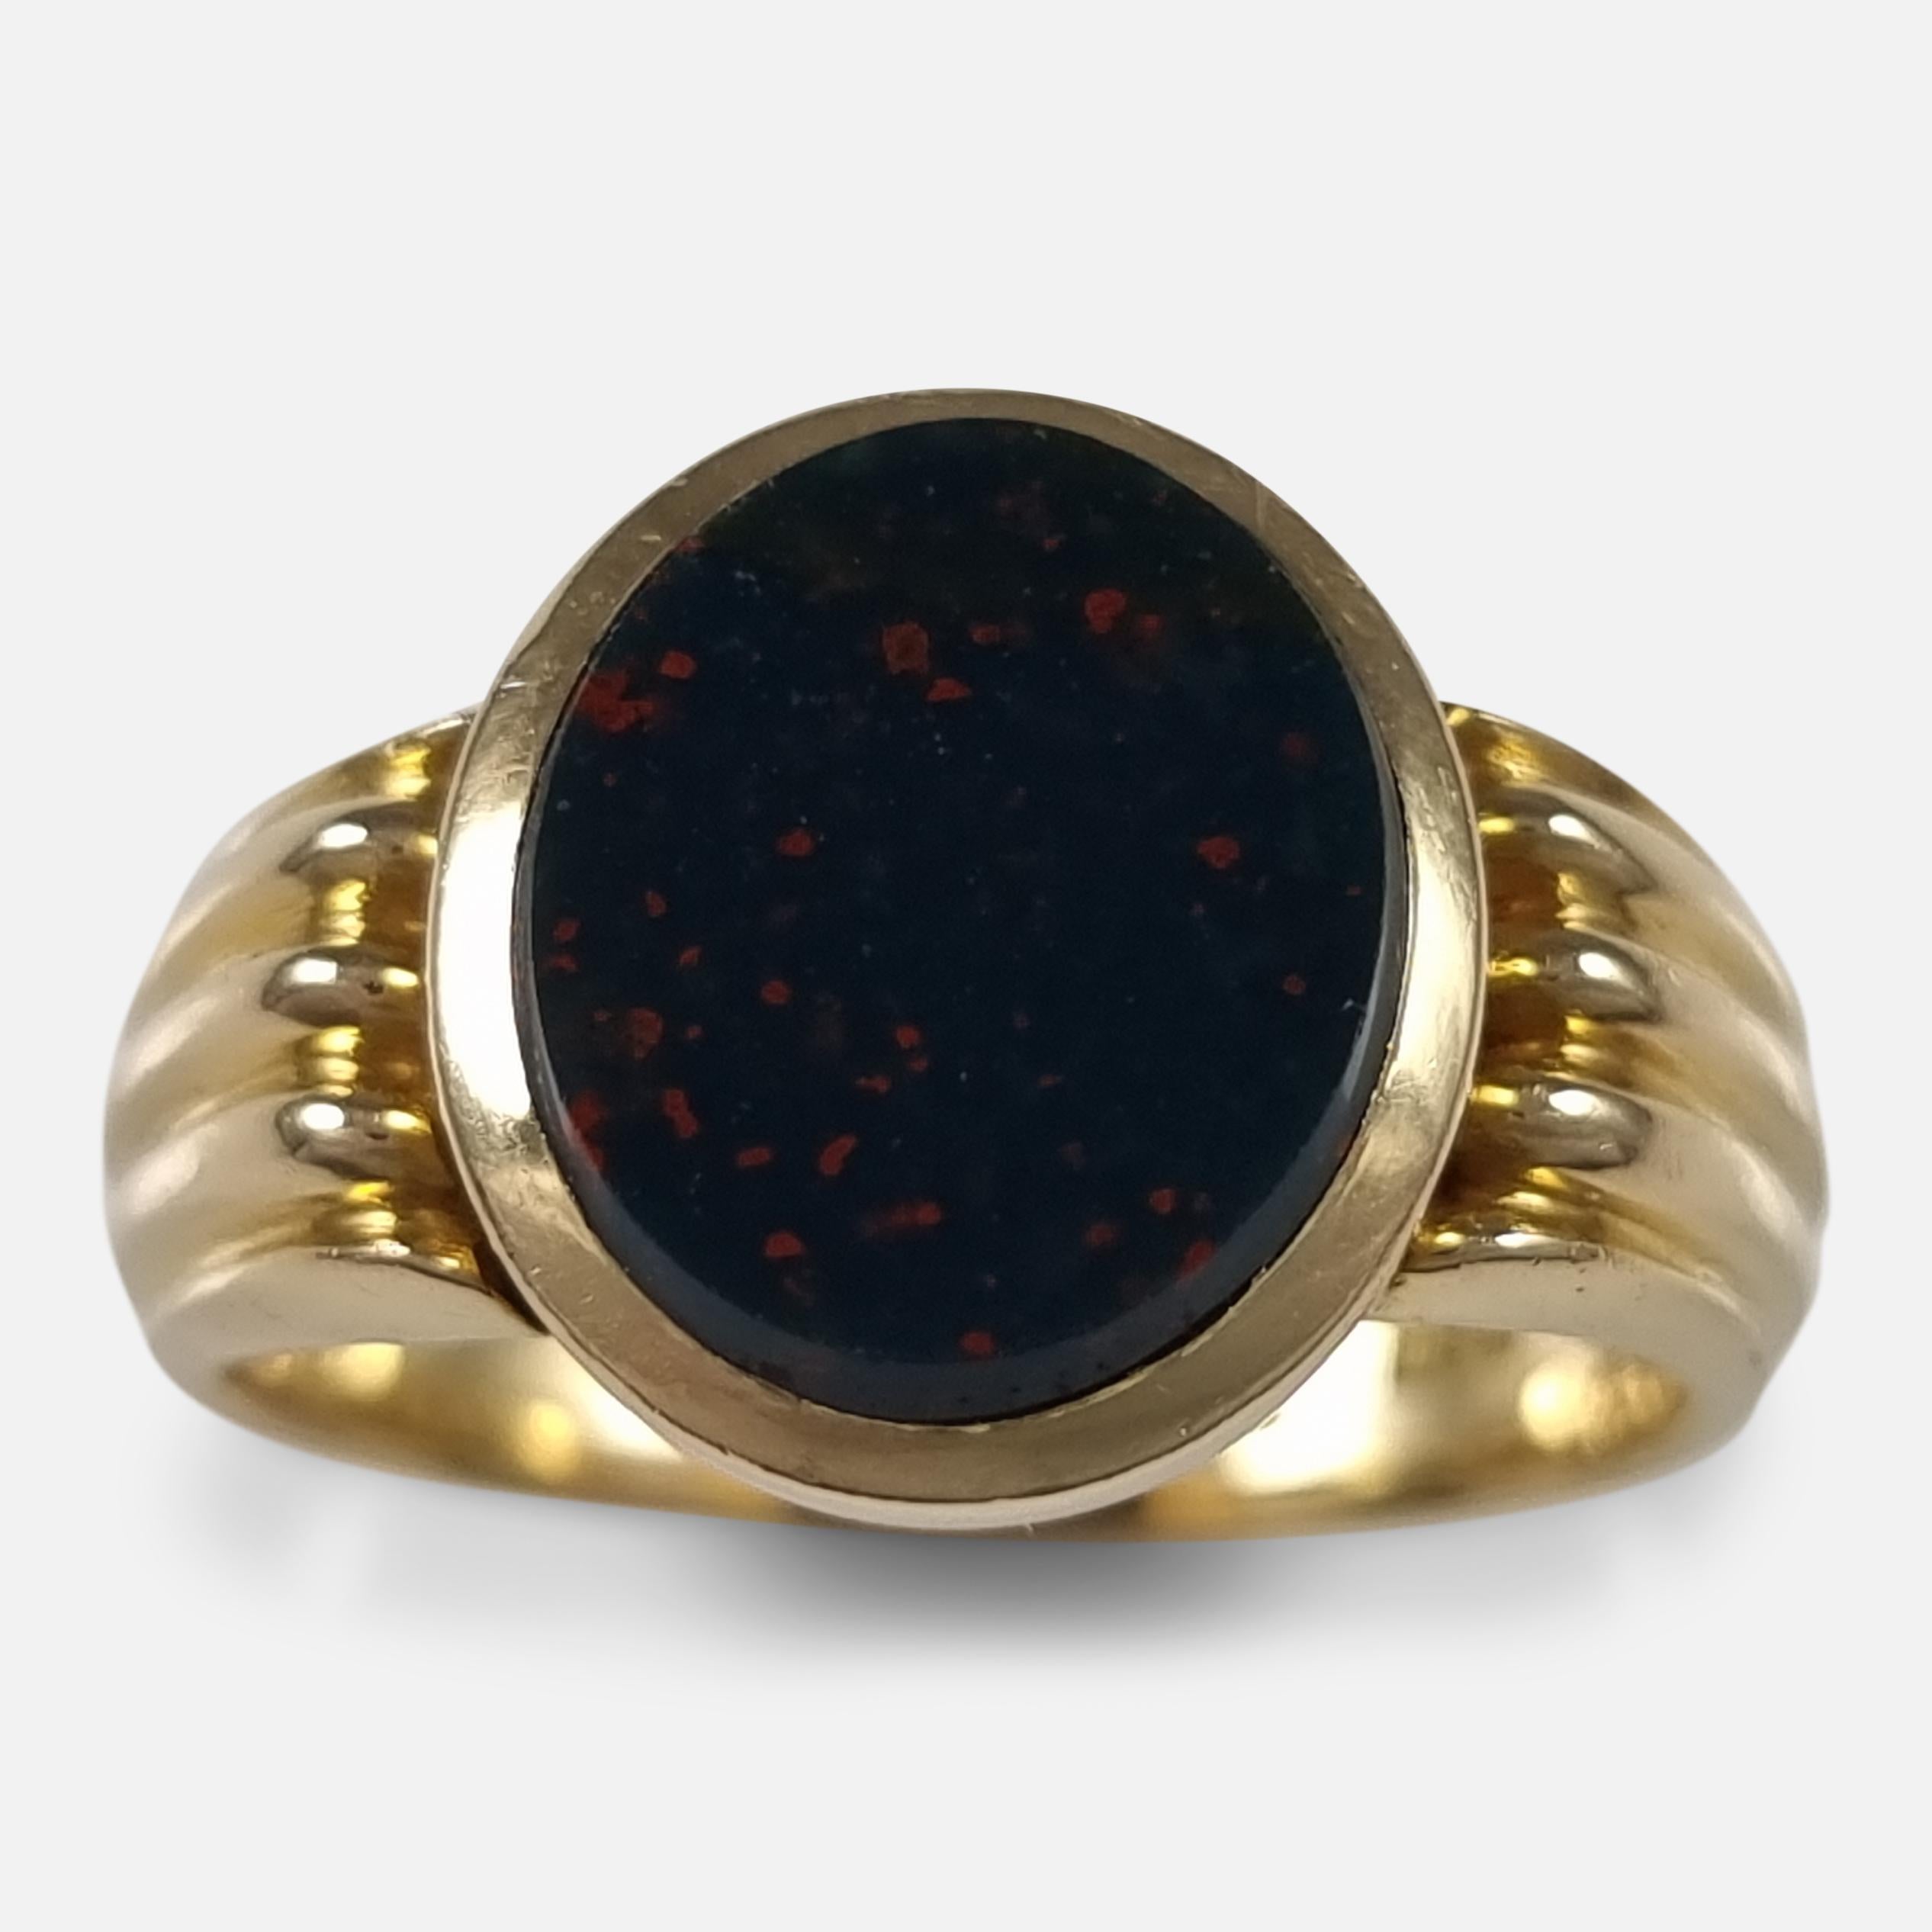 A Victorian 18ct yellow gold bloodstone signet ring. The signet ring is set with an oval bloodstone, leading to reeded shoulders, and plain shank.

The ring is hallmarked with Birmingham assay office marks, the date letter 